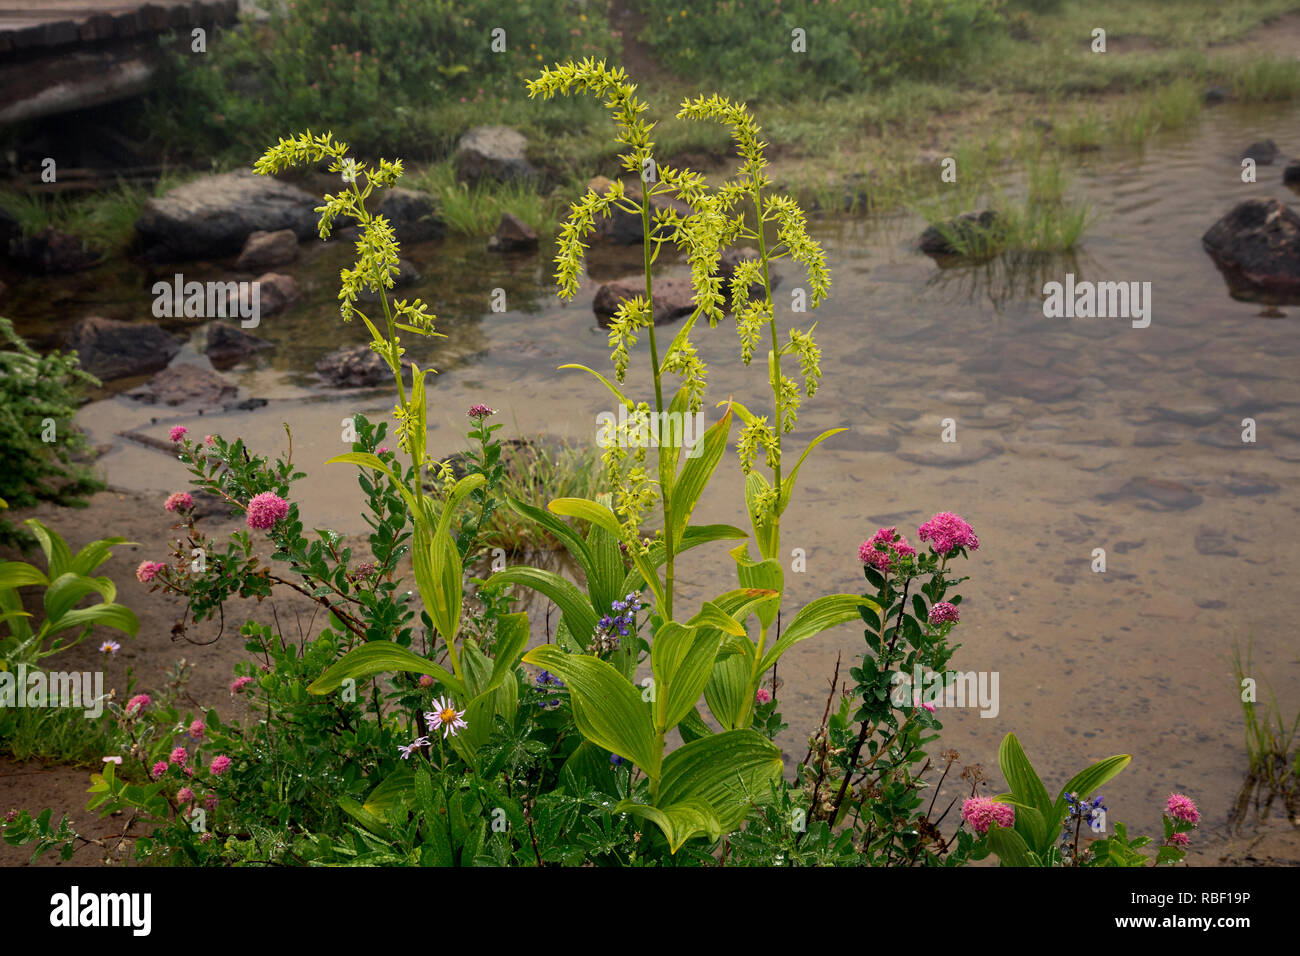 WA15715-00...WASHINGTON - Alpine aster and green hellebore growing on the shores of Tipsoo Lake in Mount Rainier National Park. Stock Photo